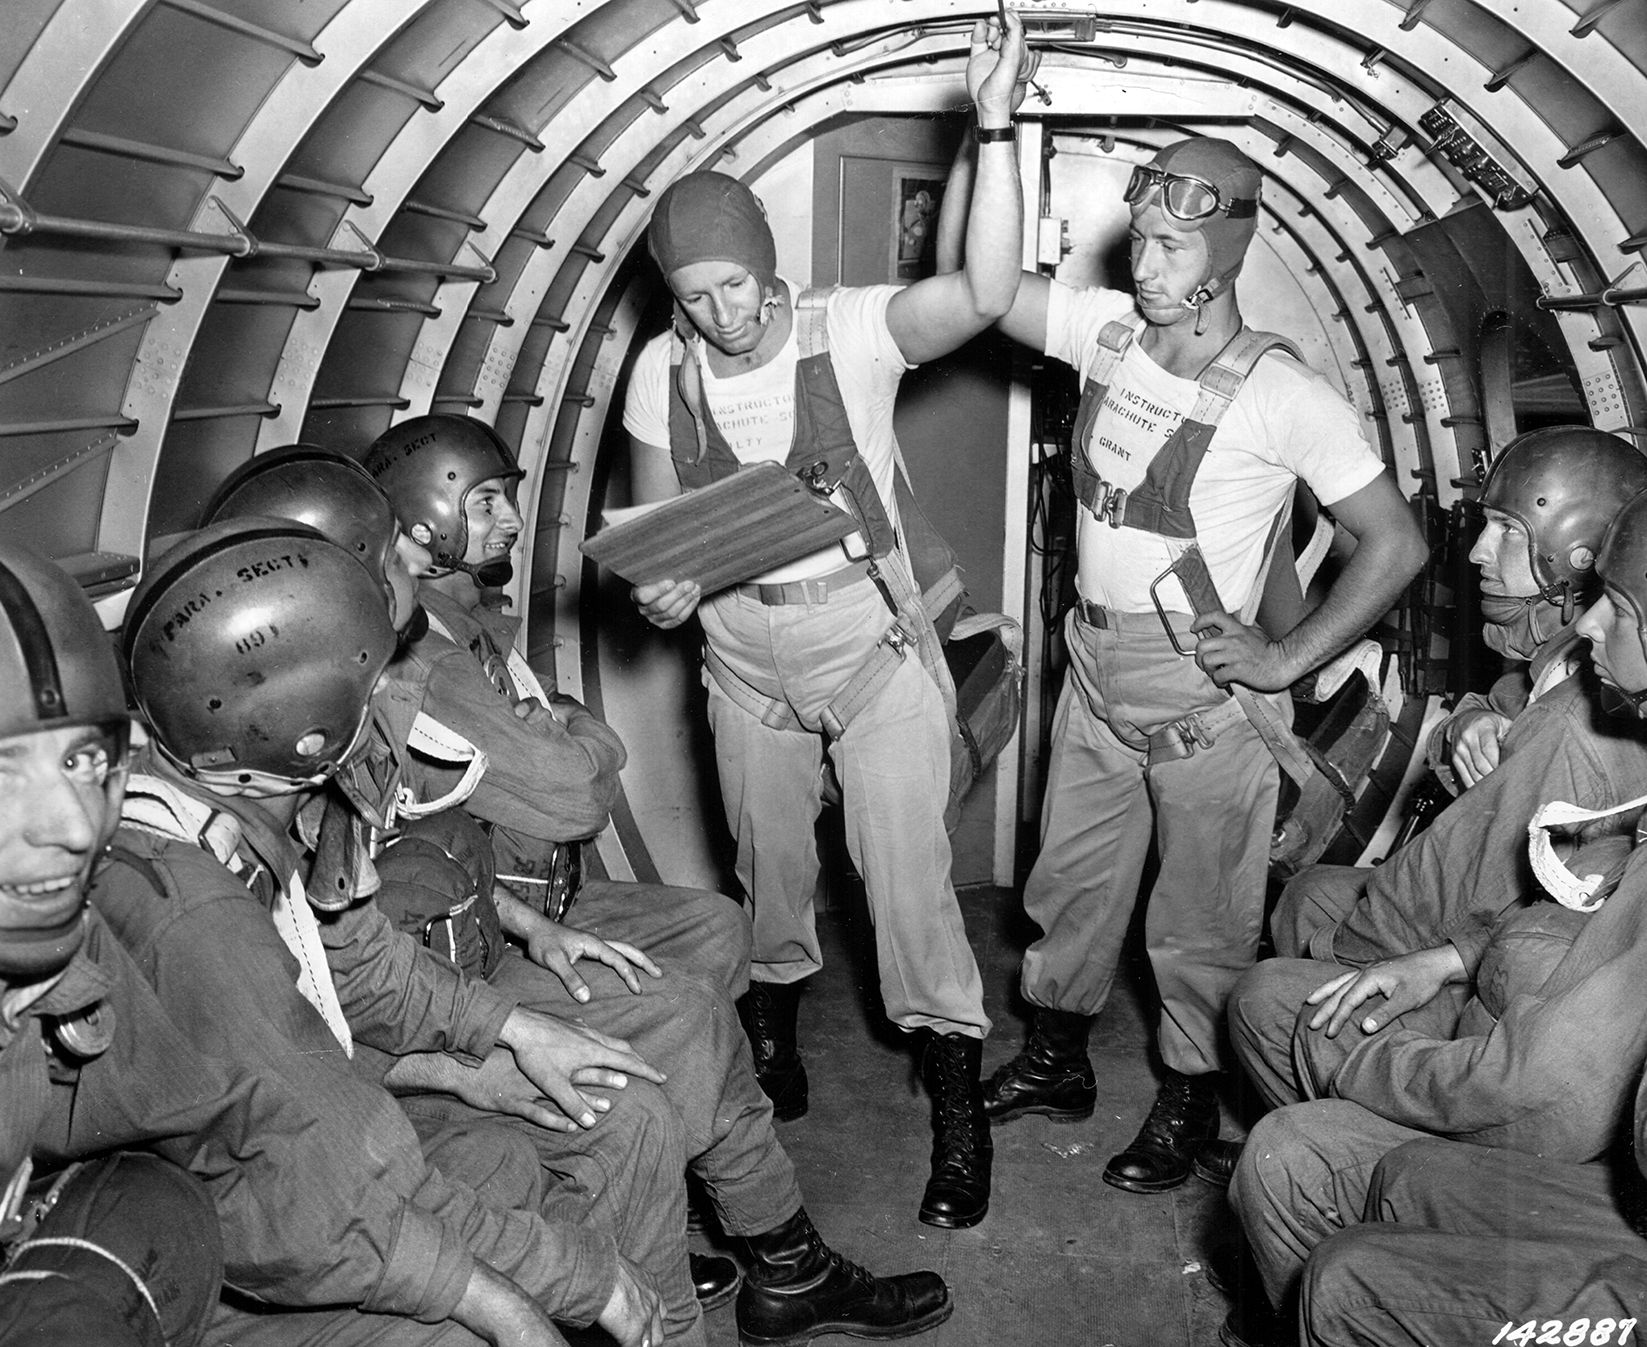 After boarding their transport plane for exercises in July 1942, paratroopers listen as the jump master calls their names. A pre-jump roll call was required for all airborne parachute exercises.